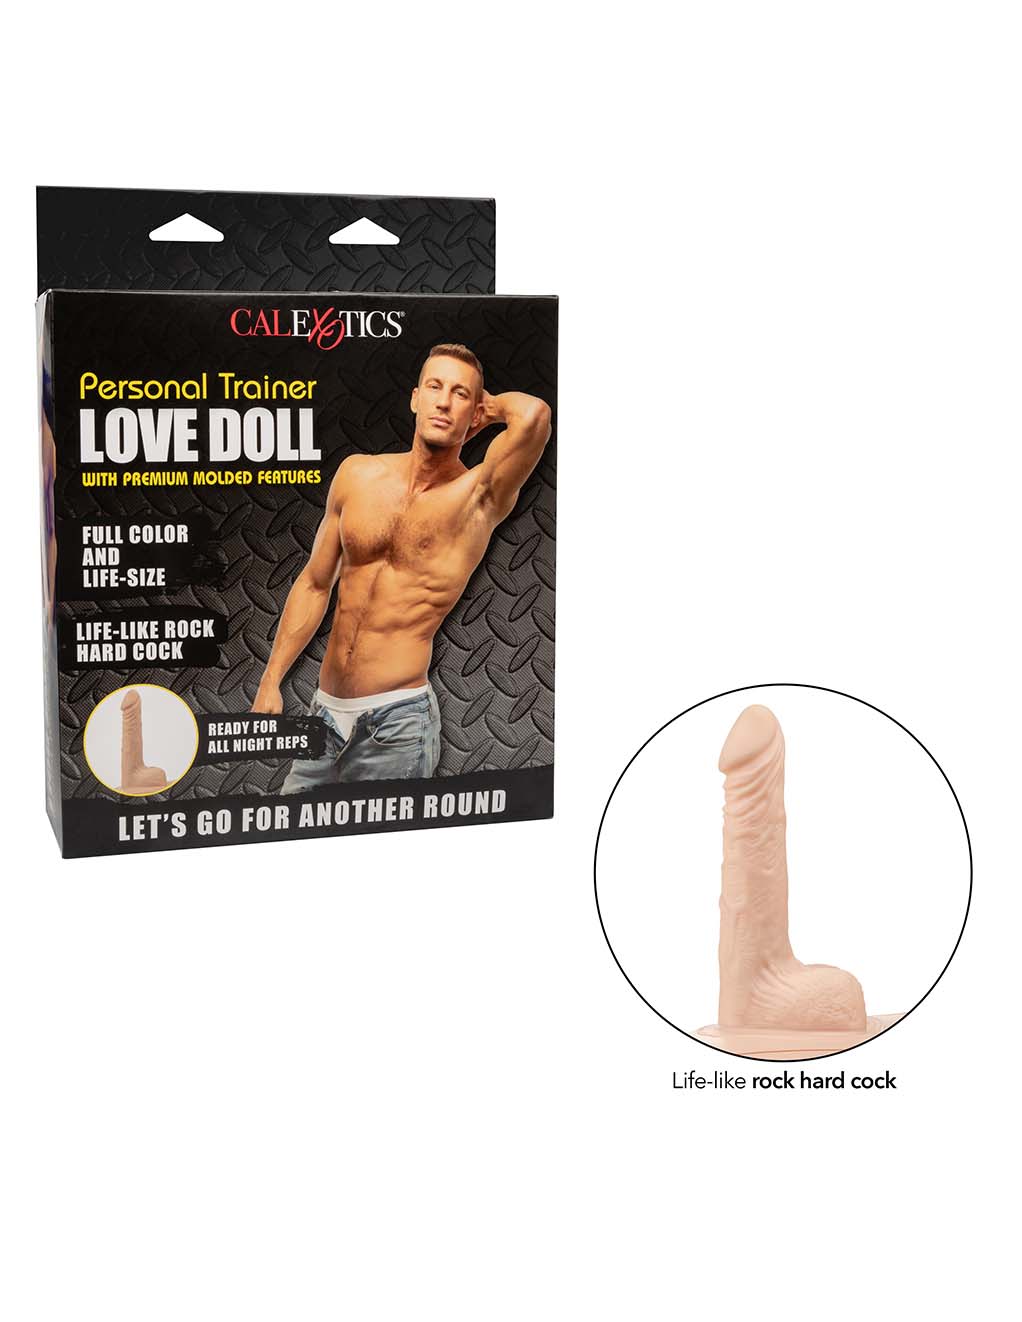 Personal Trainer Love Doll- Details